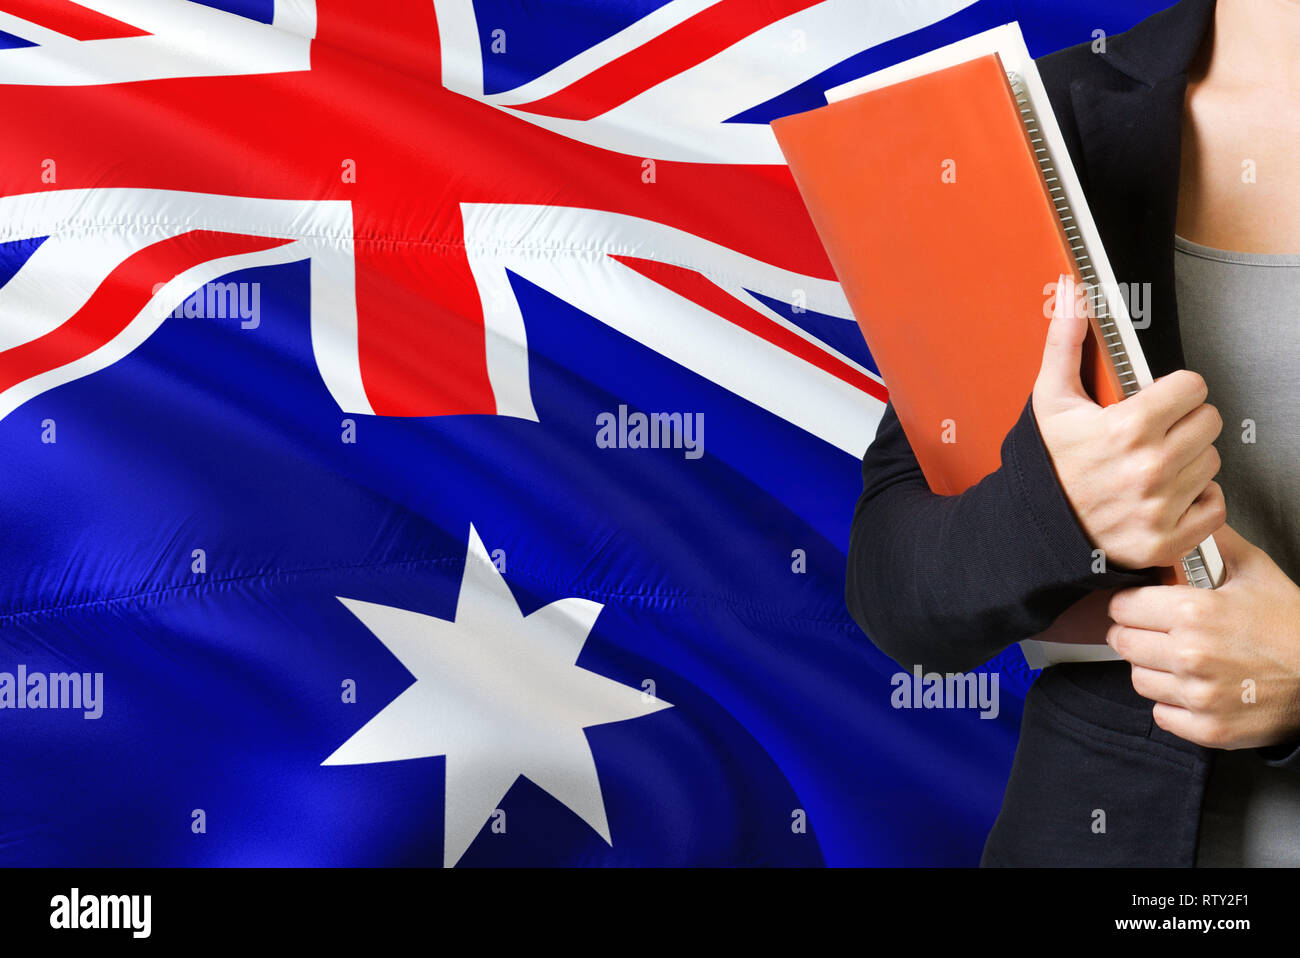 Learning language concept. Young woman standing with the Heard Island and Mcdonald Islands flag in the background. Teacher holding books, orange blank Stock Photo